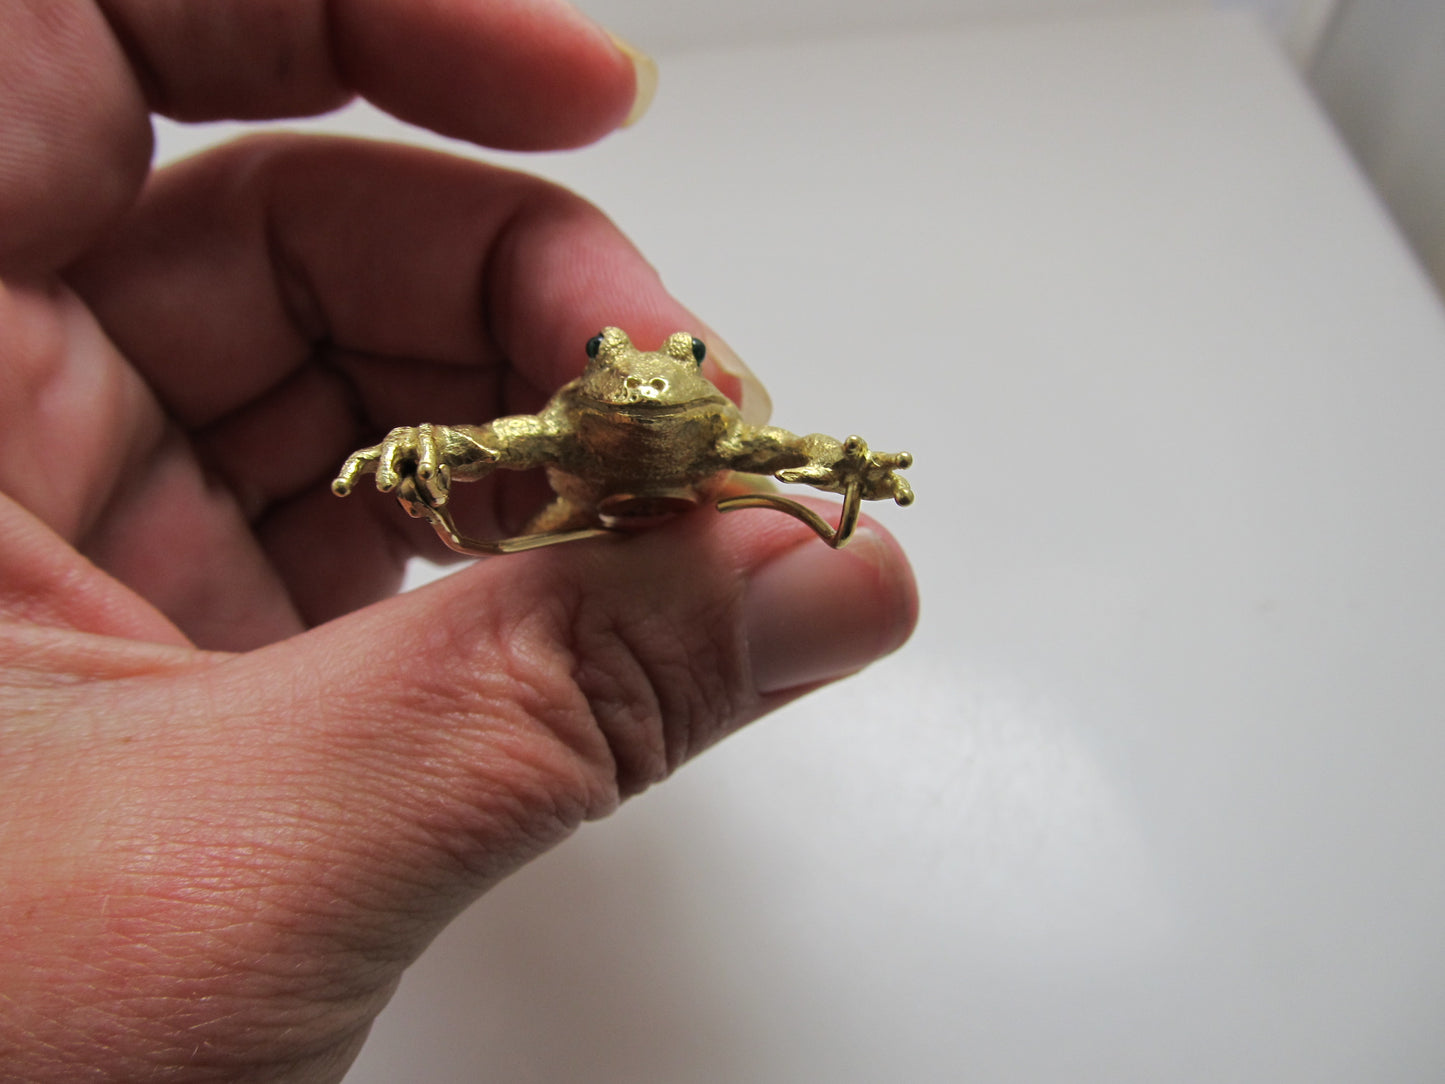 Signed AH 18k yellow gold leaping frog pendant, emerald eyes